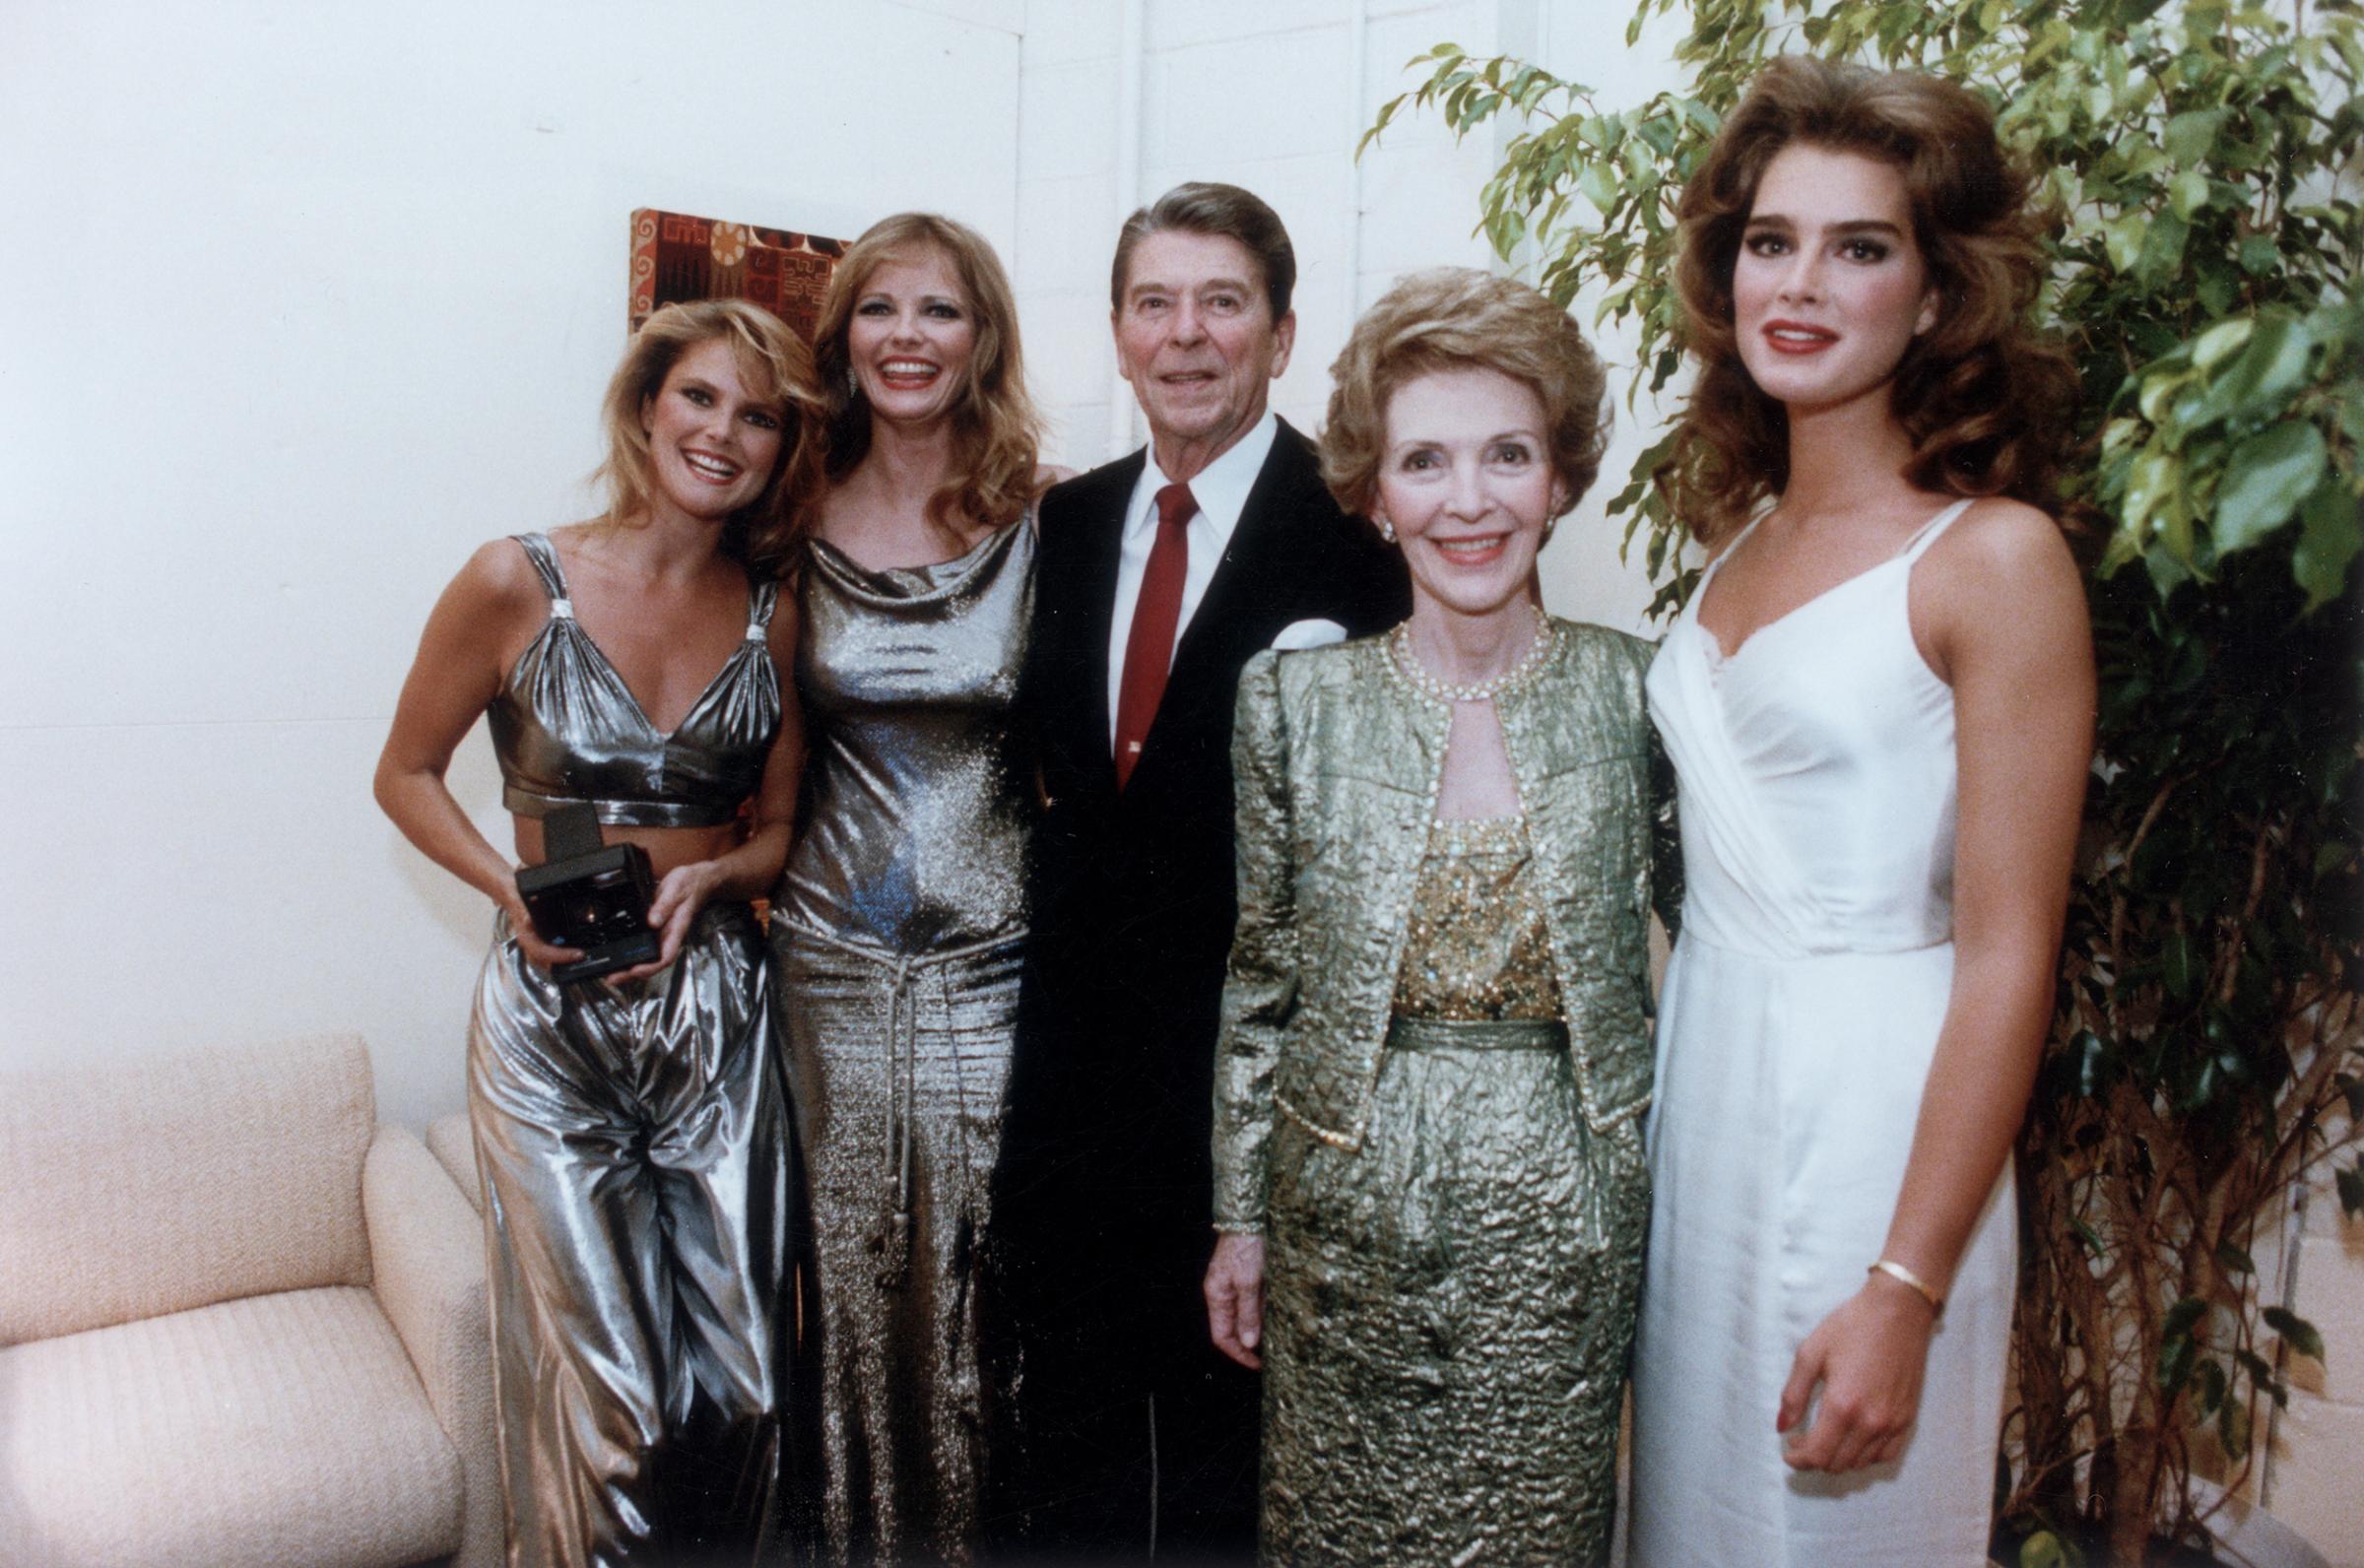 Ronald Reagan and Nancy Reagan pose with American models, Christie Brinkley, Cheryl Tiegs and Brooke Shields backstage at the Bob Hope USO show on May 20, 1983.